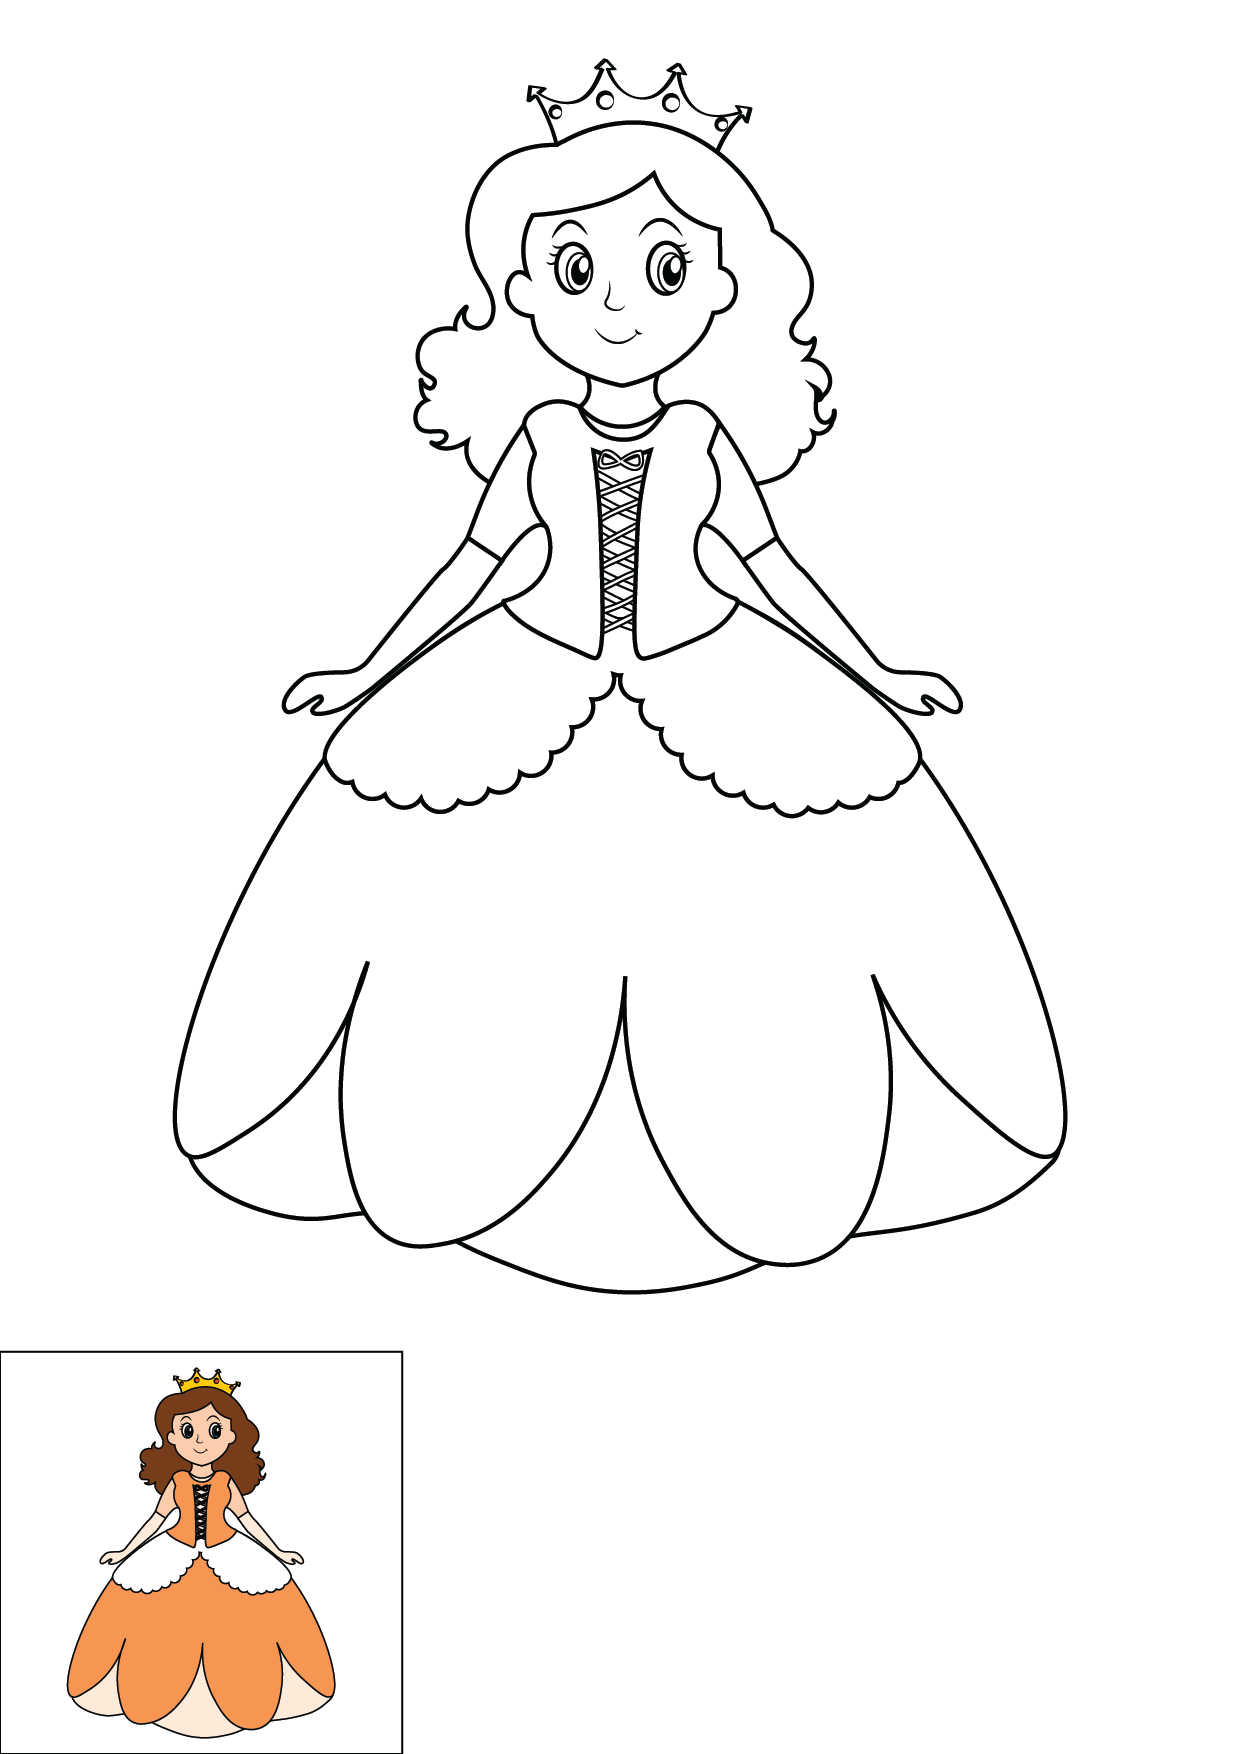 How to Draw A Princess Step by Step Printable Color